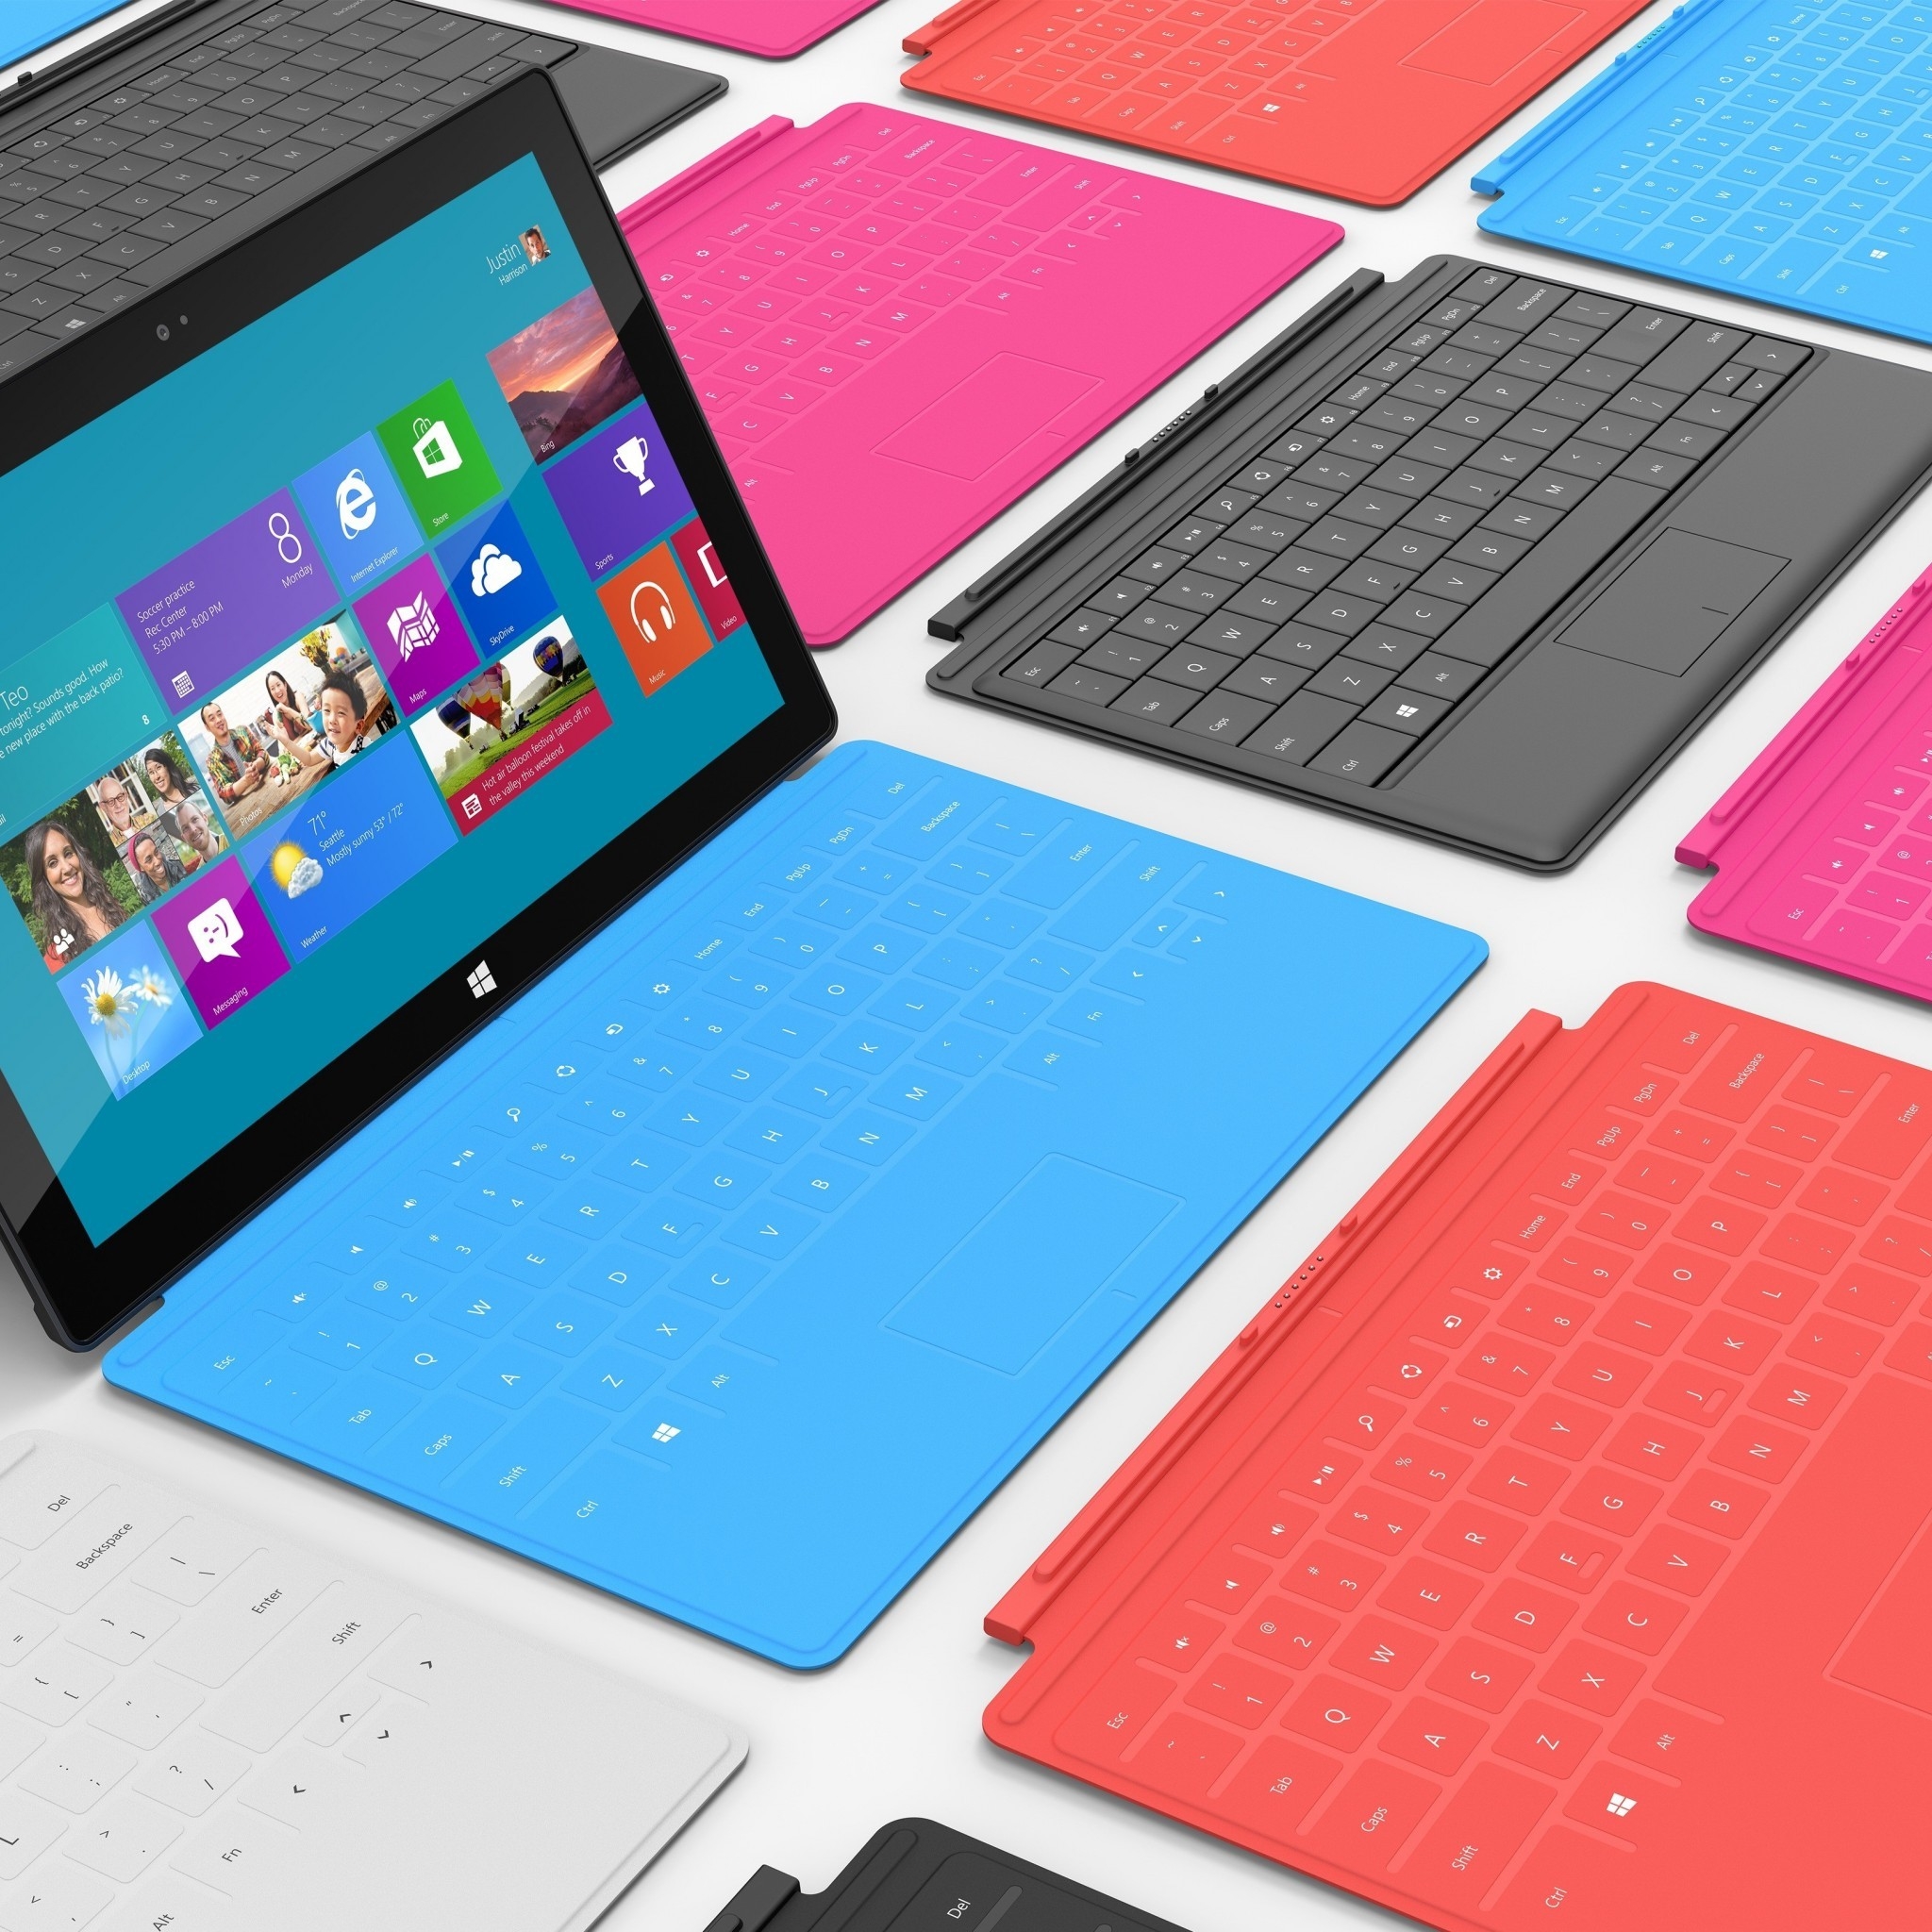 Windows Tablet for 2048 x 2048 New iPad resolution